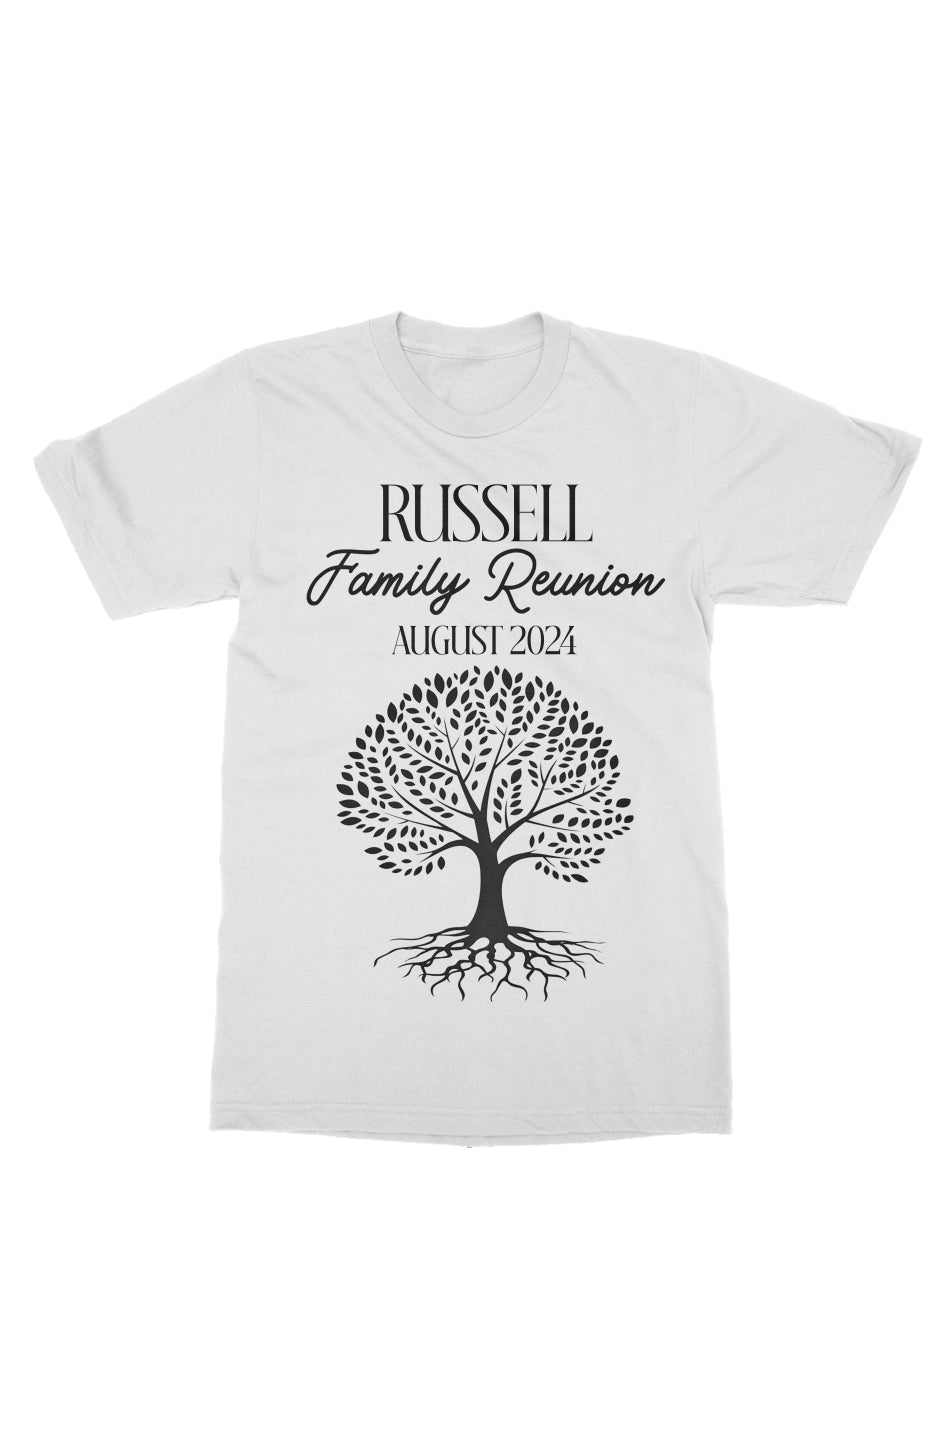 Russell White t shirt